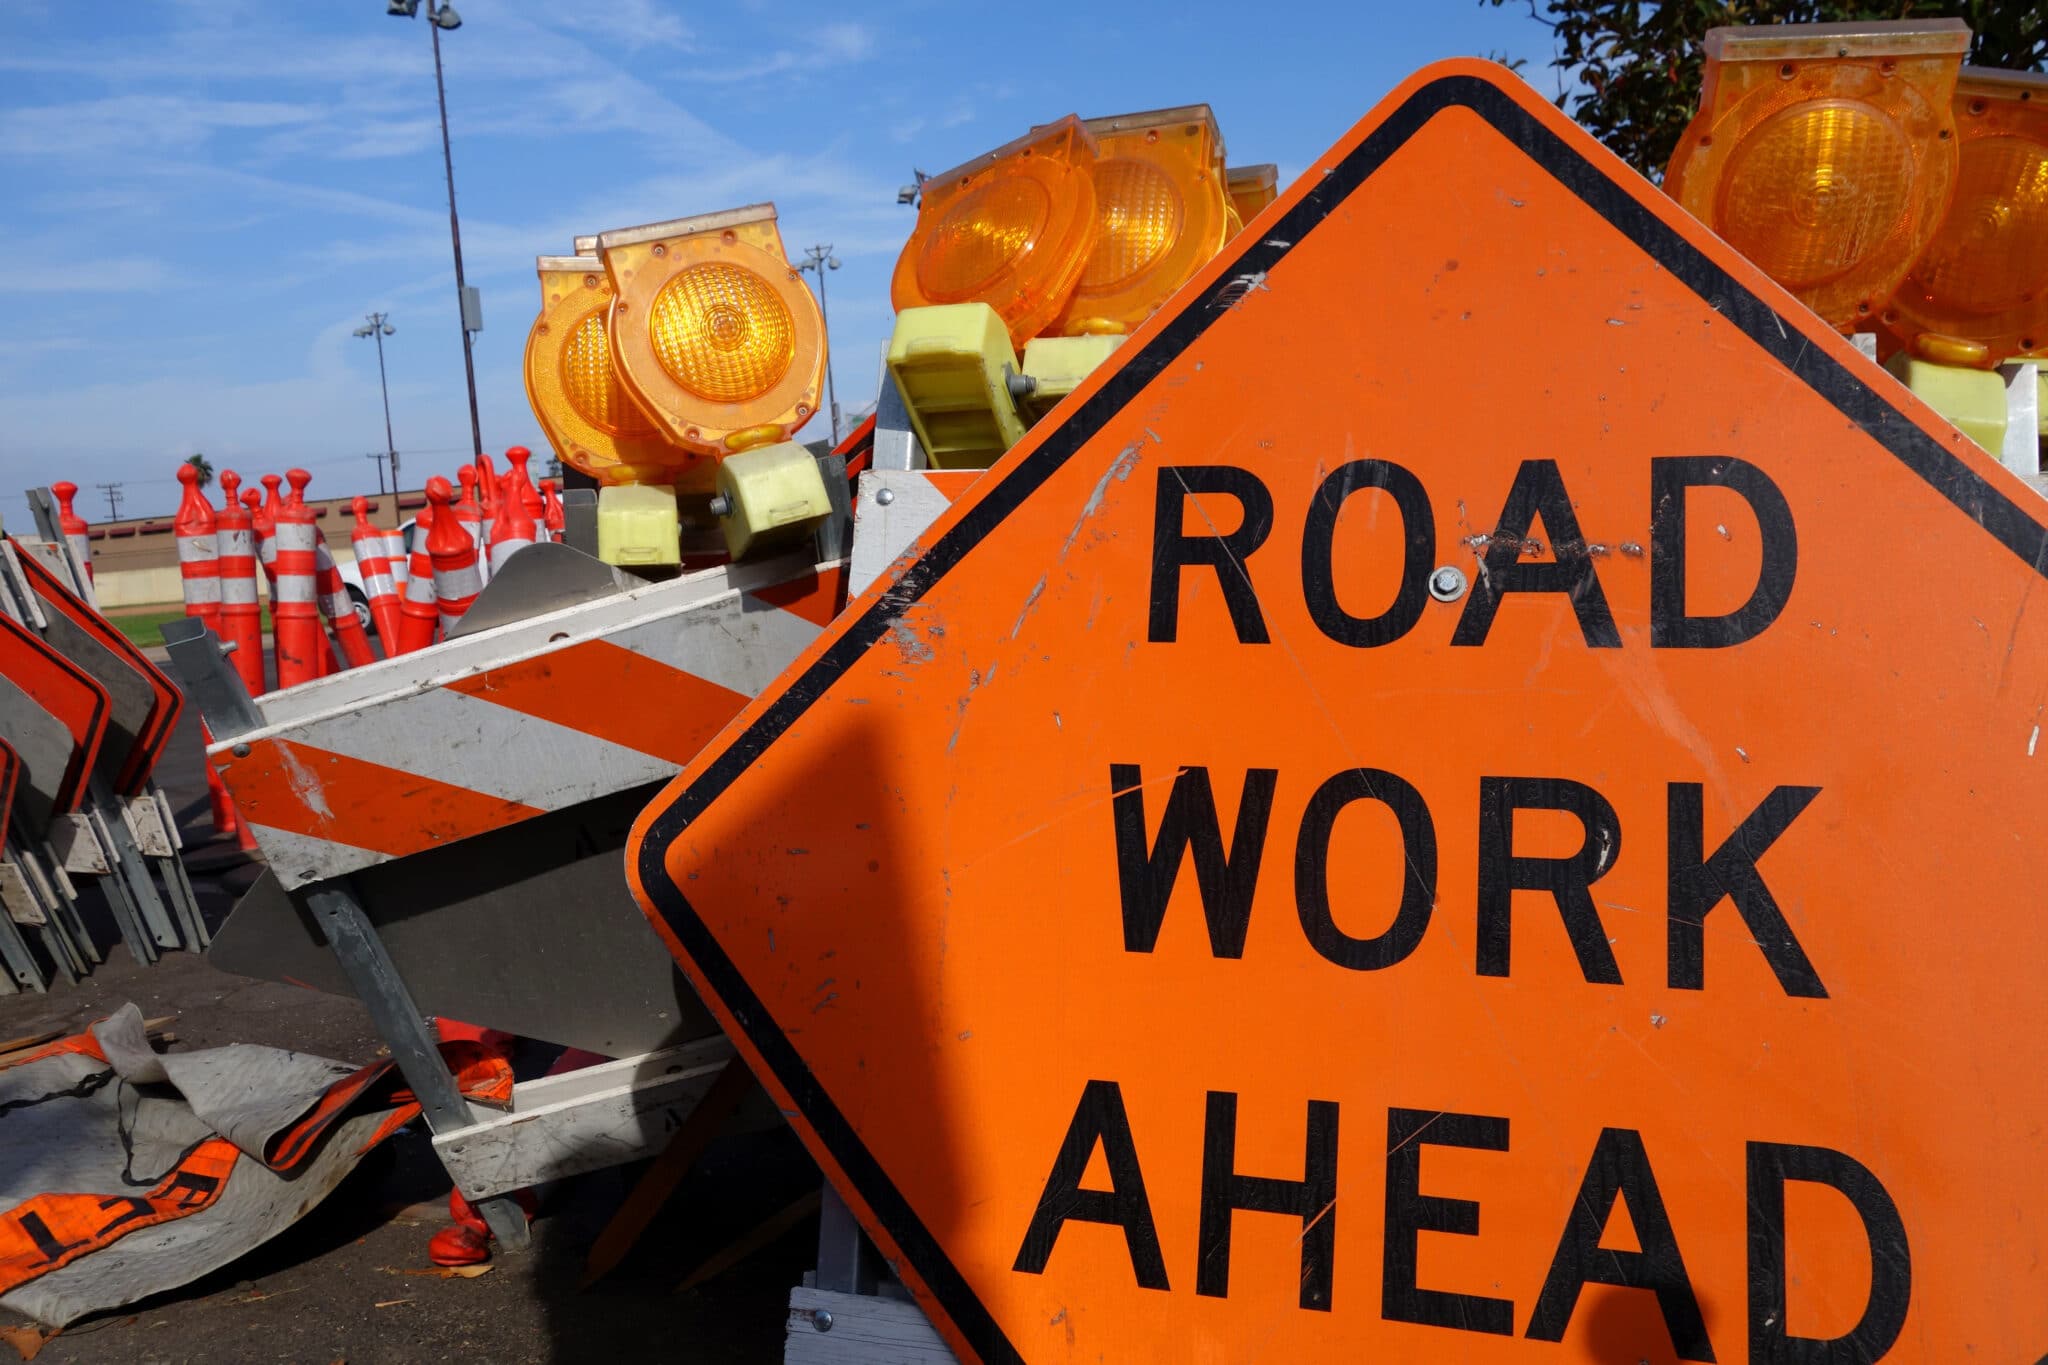 Lanes will be closed on Highway 9 in Alpharetta this weekend